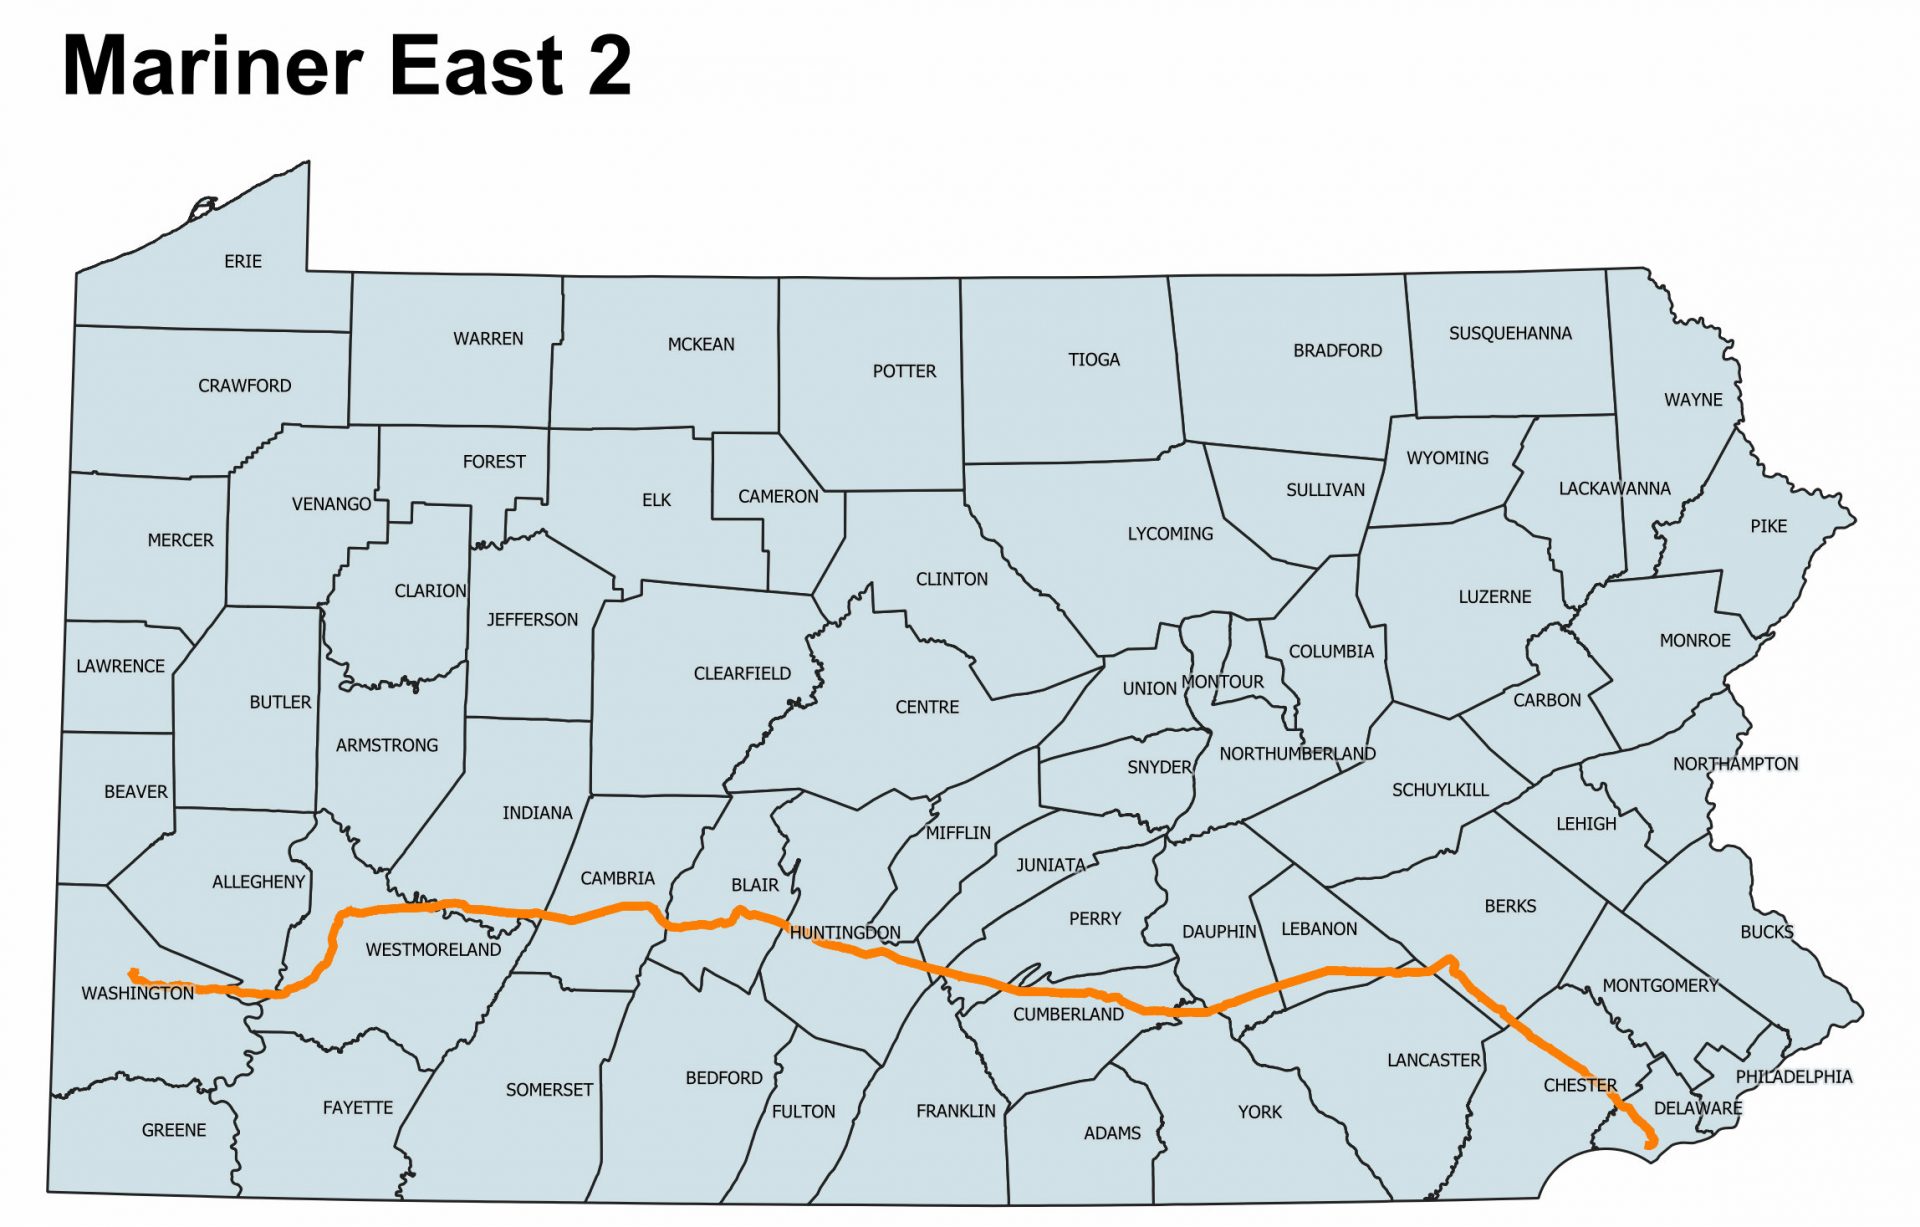 The Mariner East 2 pipeline begins in Ohio, then cuts through 17 Pennsylvania counties on its way to the Marcus Hook industrial complex in Delaware County, where the natural gas liquids it carries will be shipped overseas to make plastics.